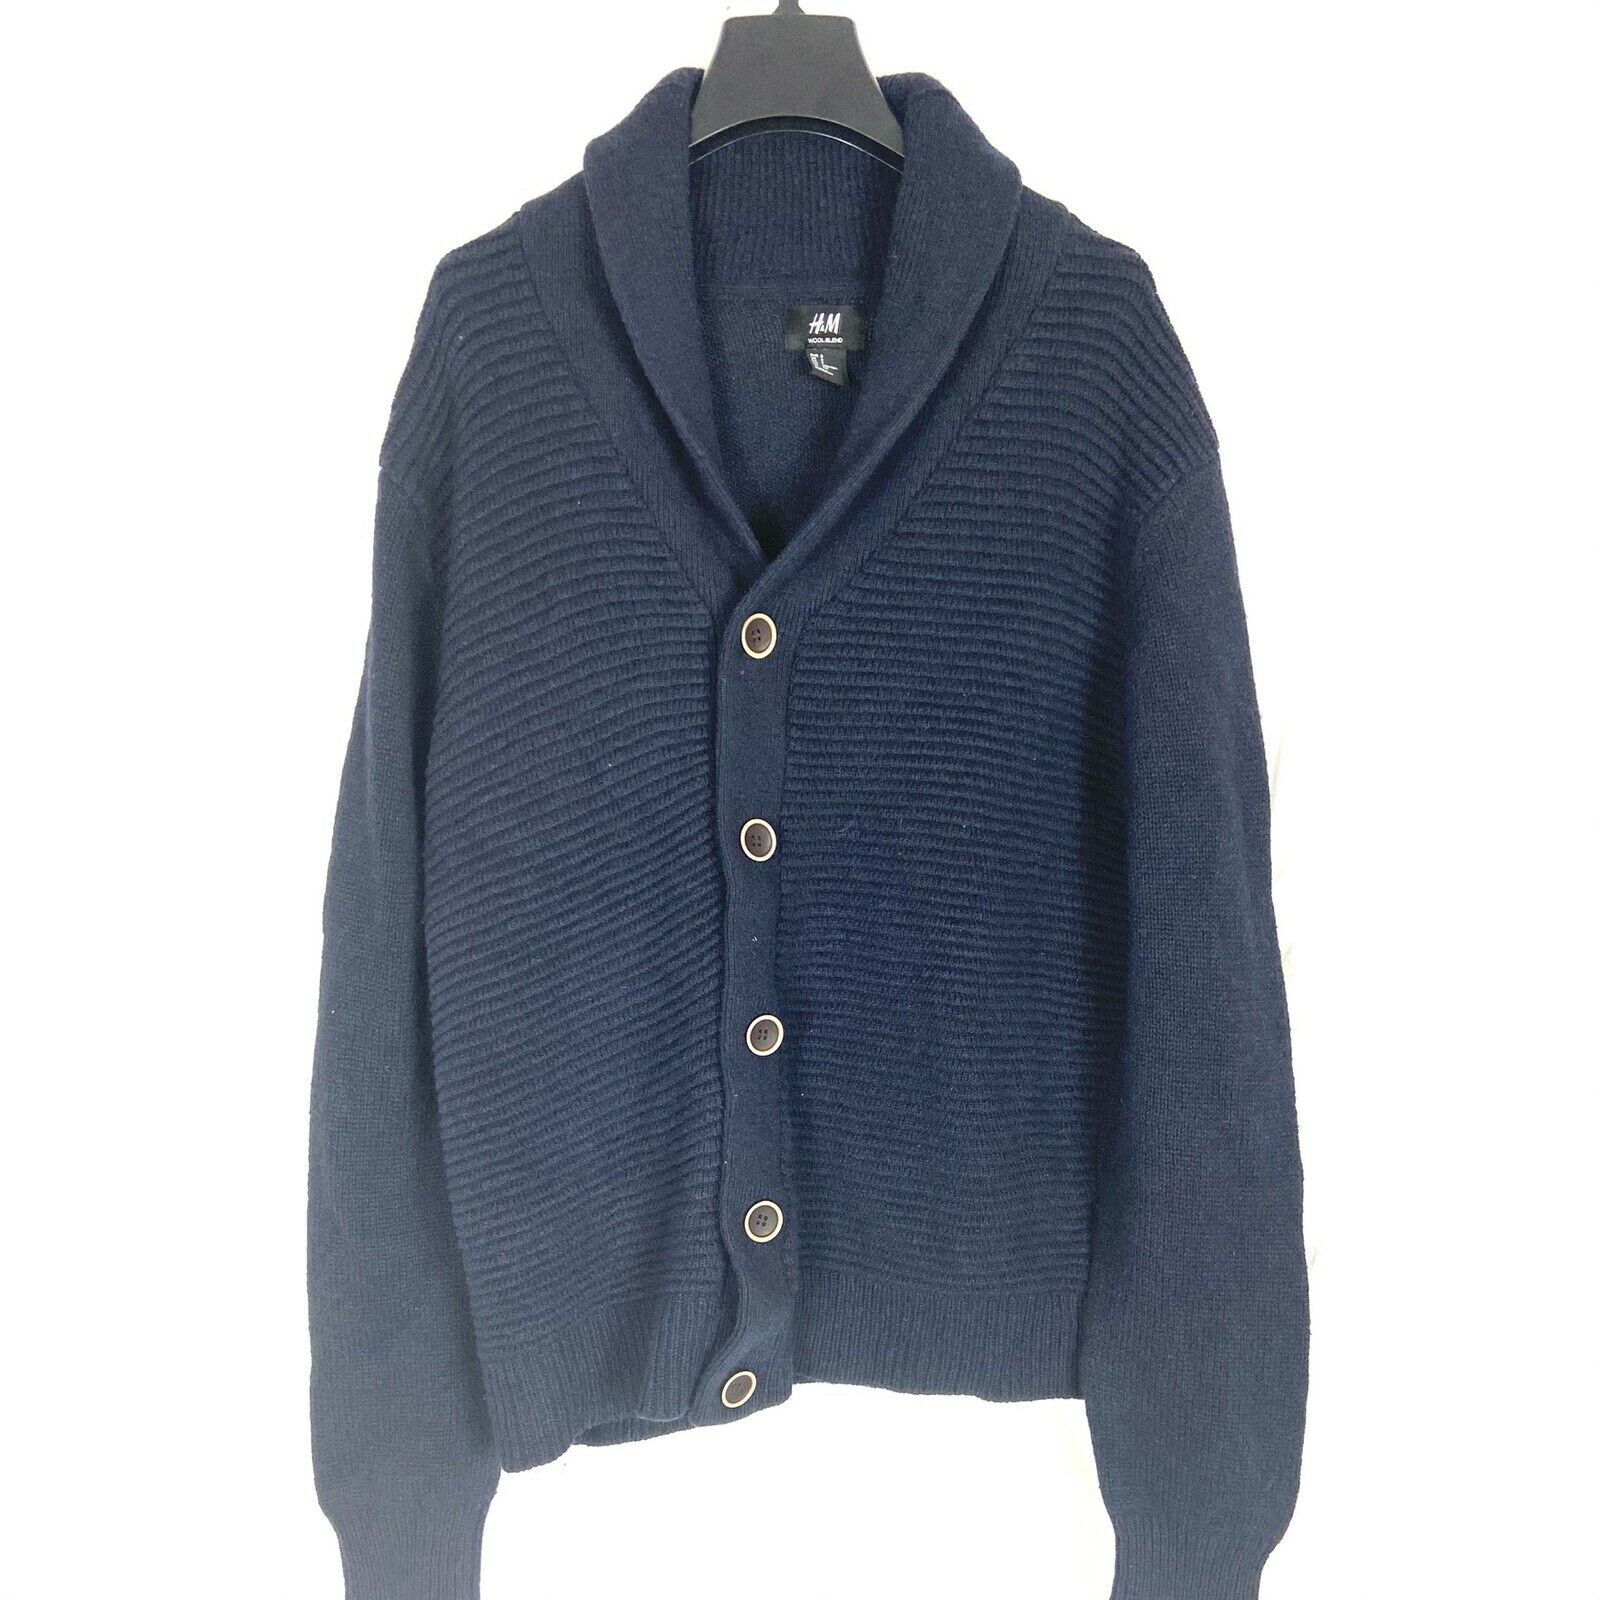 Men’s H&m Navy Blue Chunky Cable Knit Button Down Cardigan Sweater S